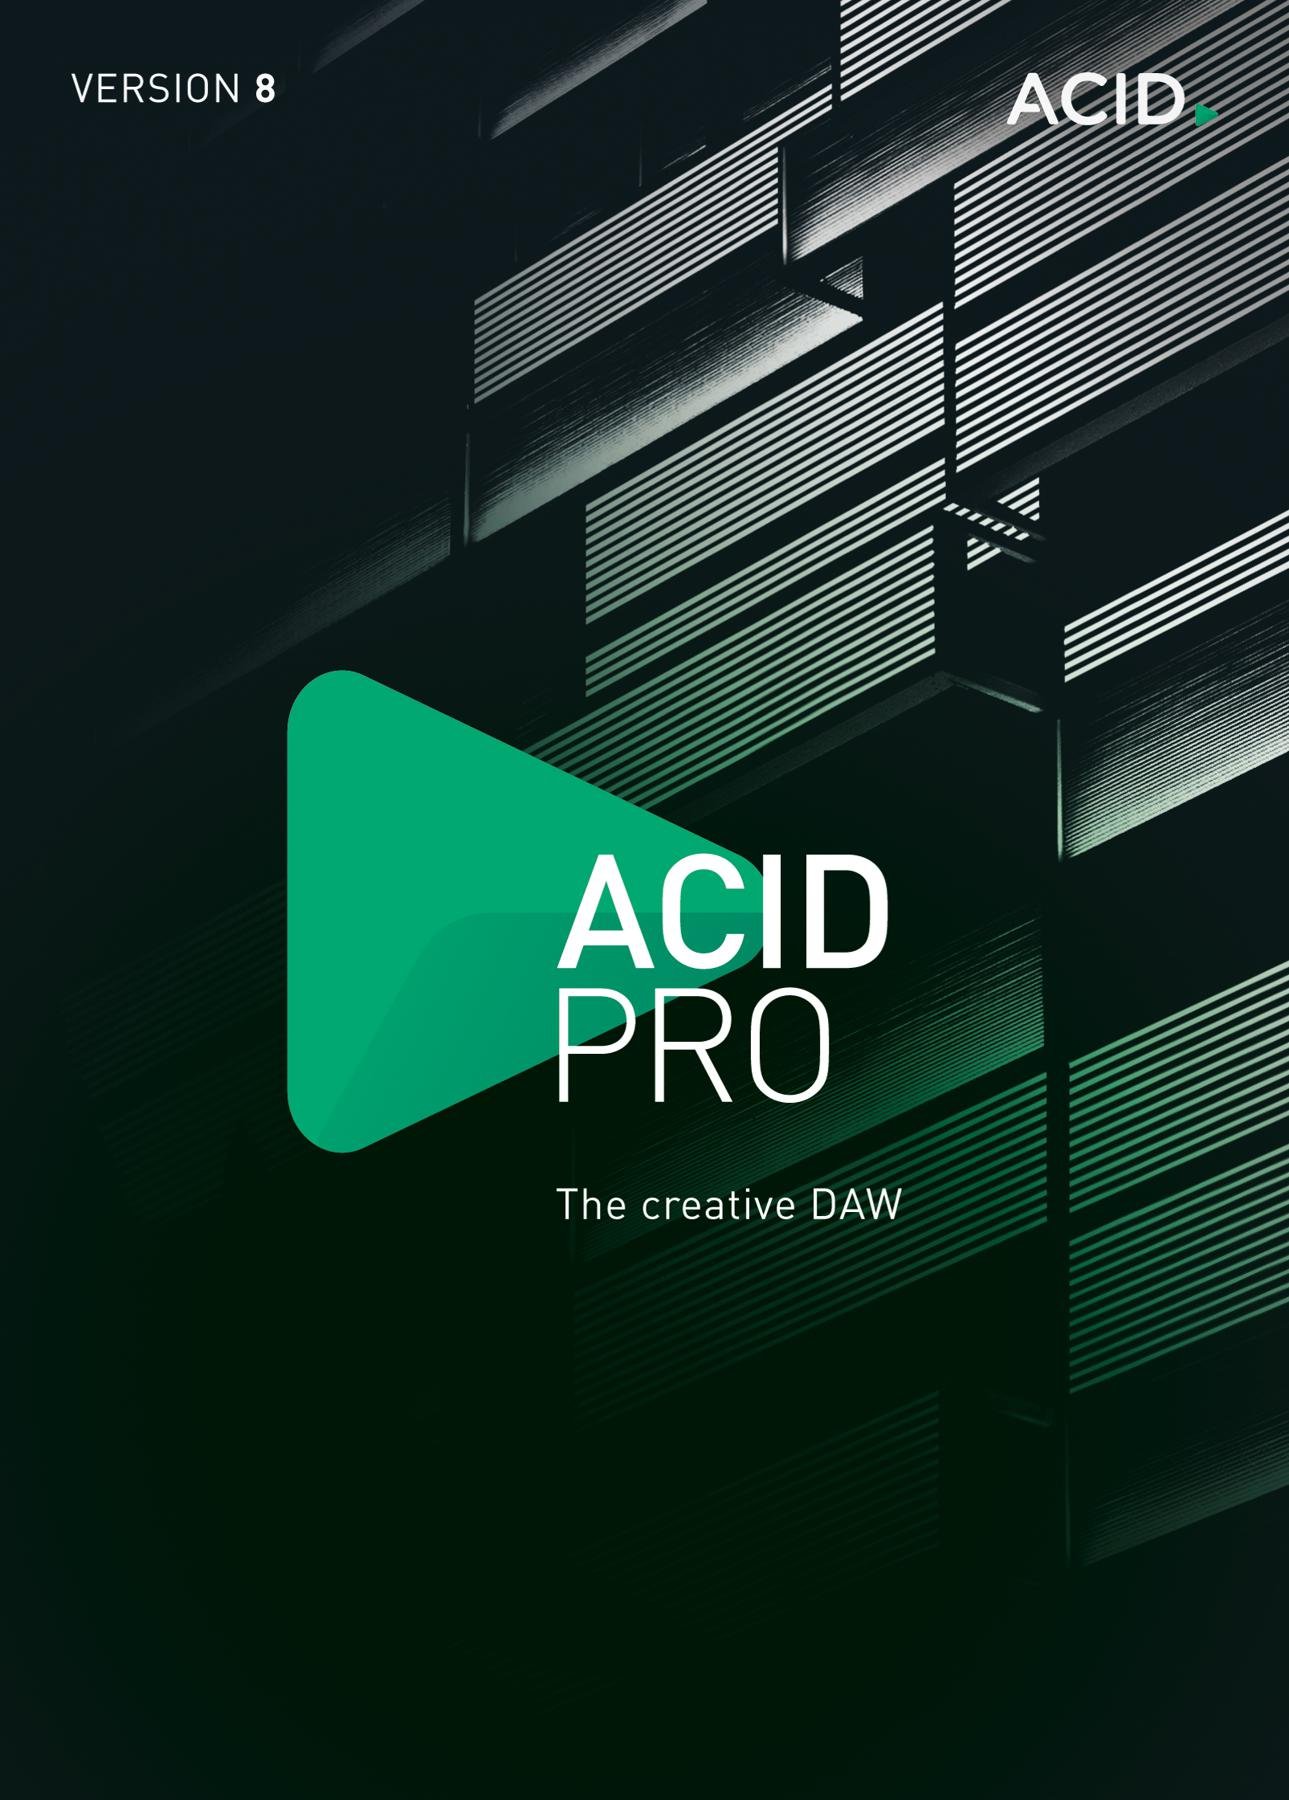 do you need a usb keyboard for acid pro 8